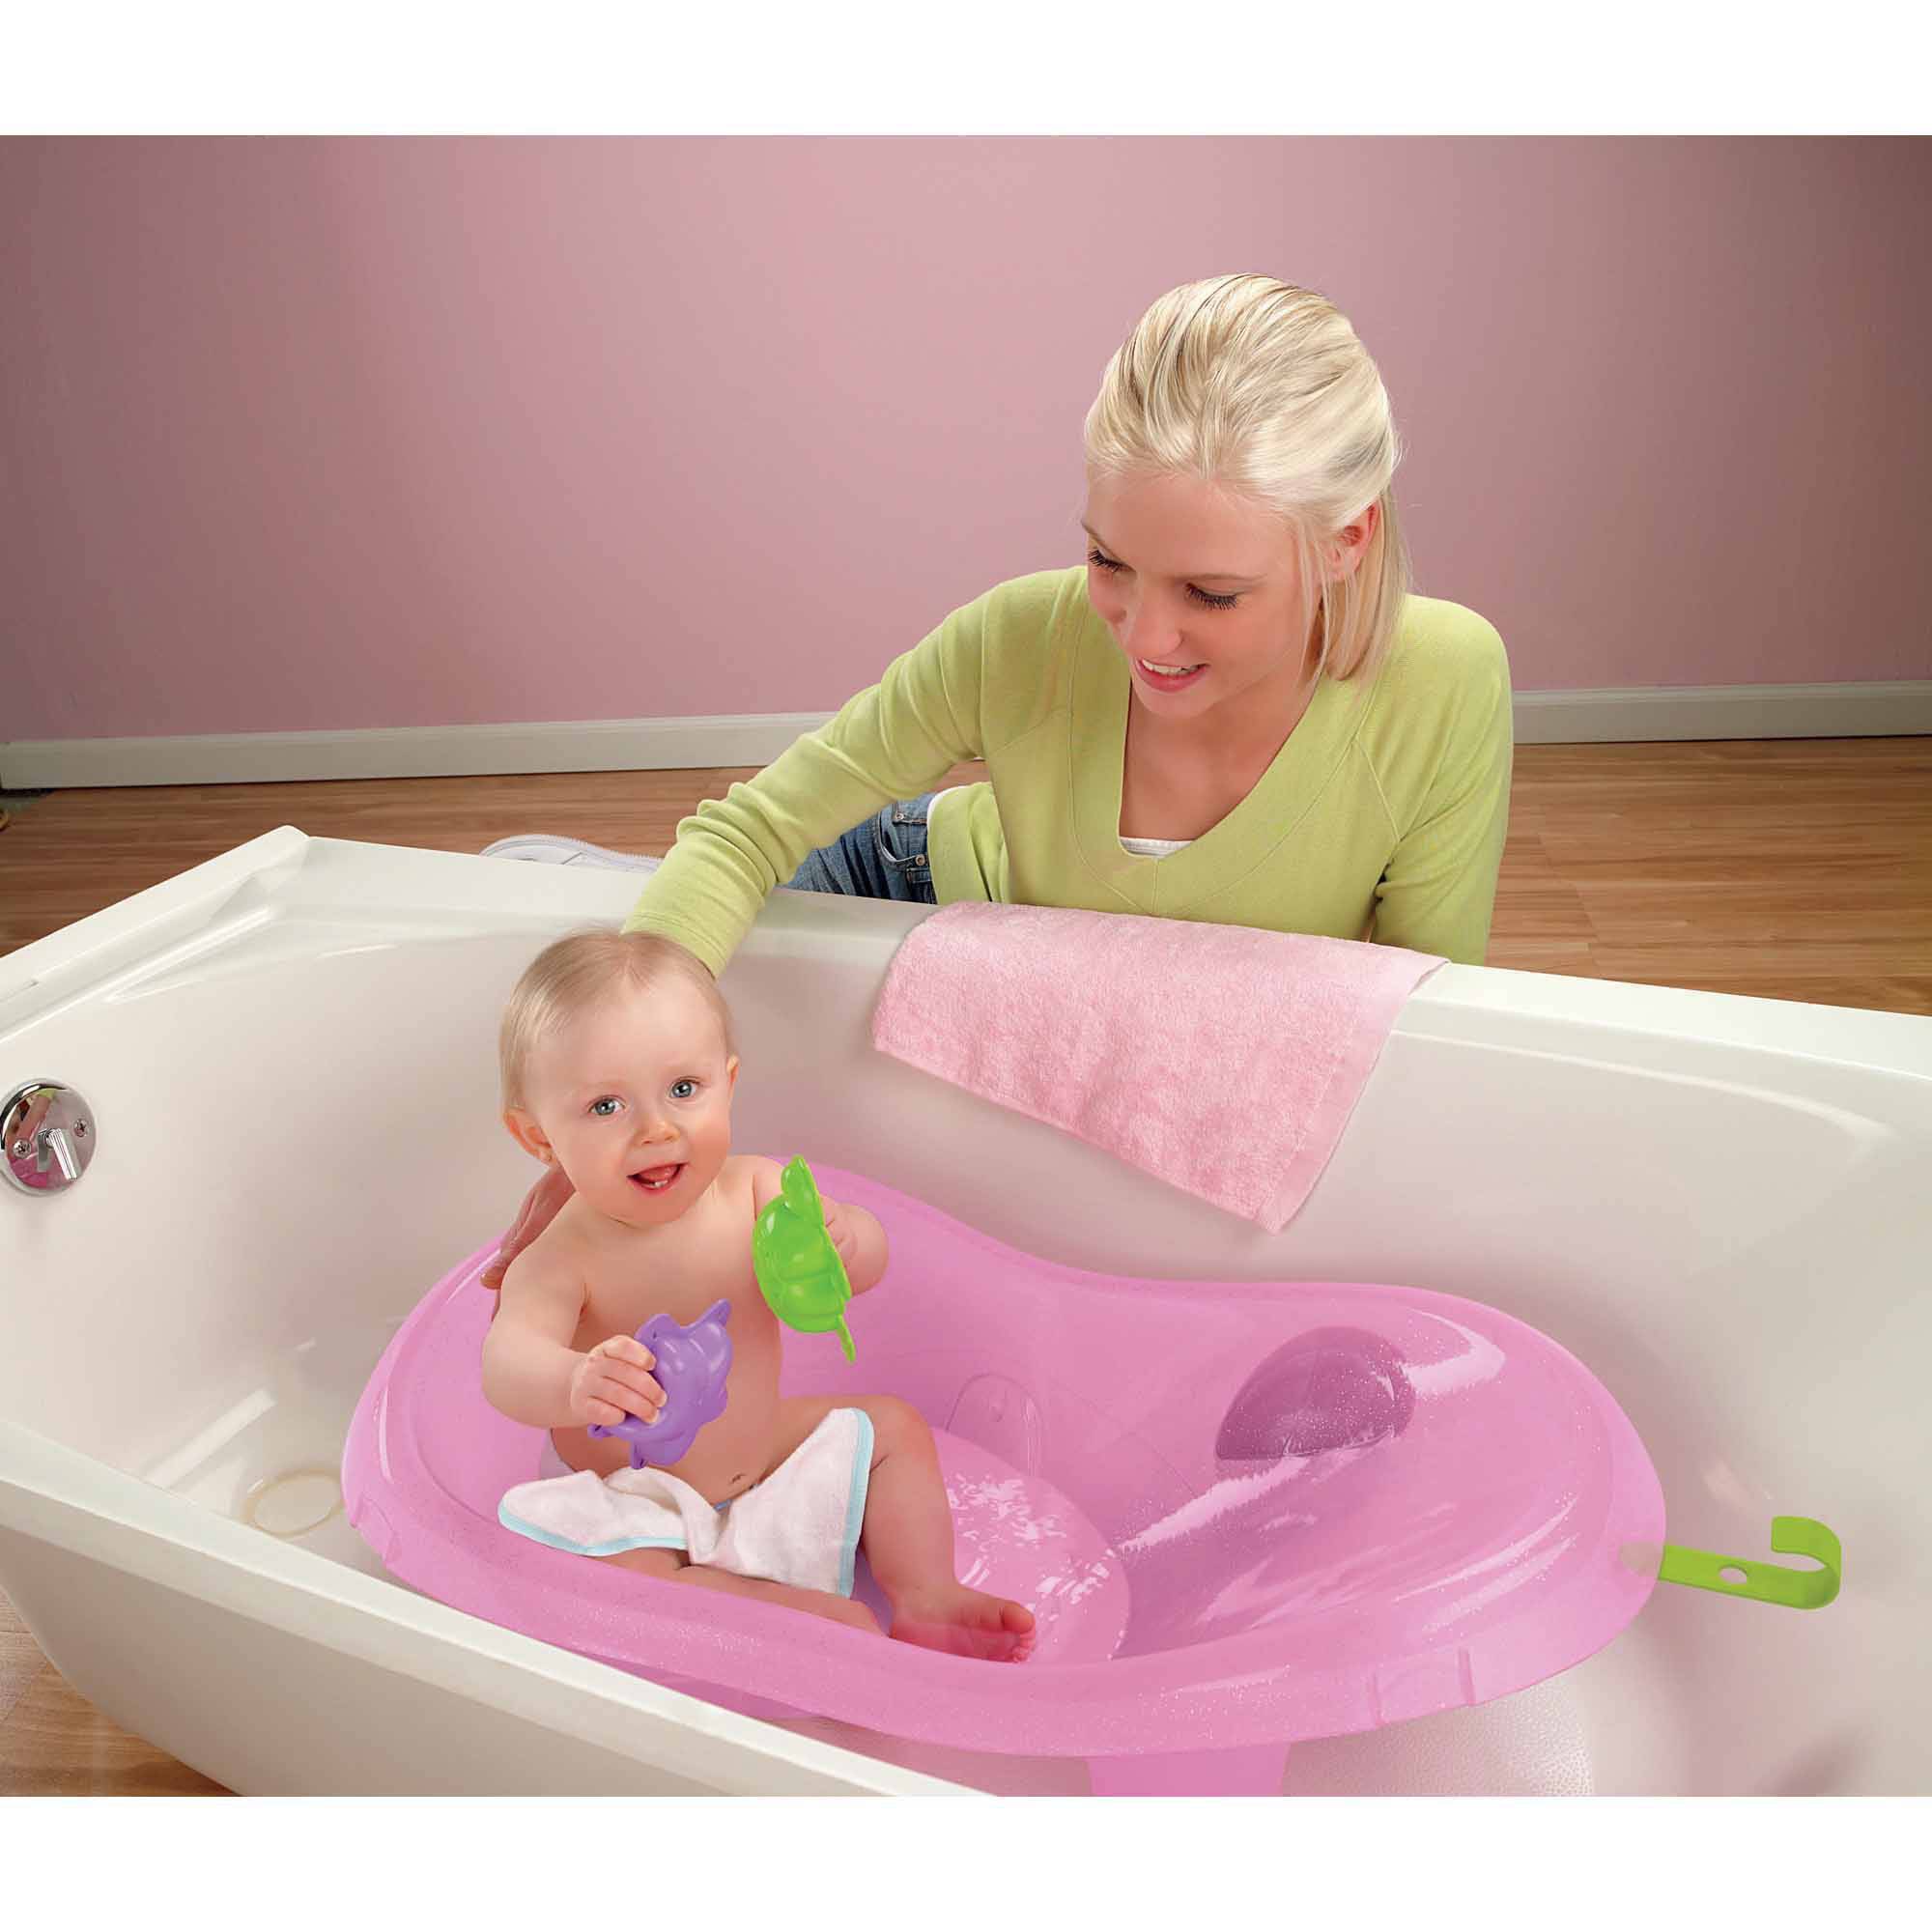 Fisher-Price Pink Sparkles Tub - image 3 of 5